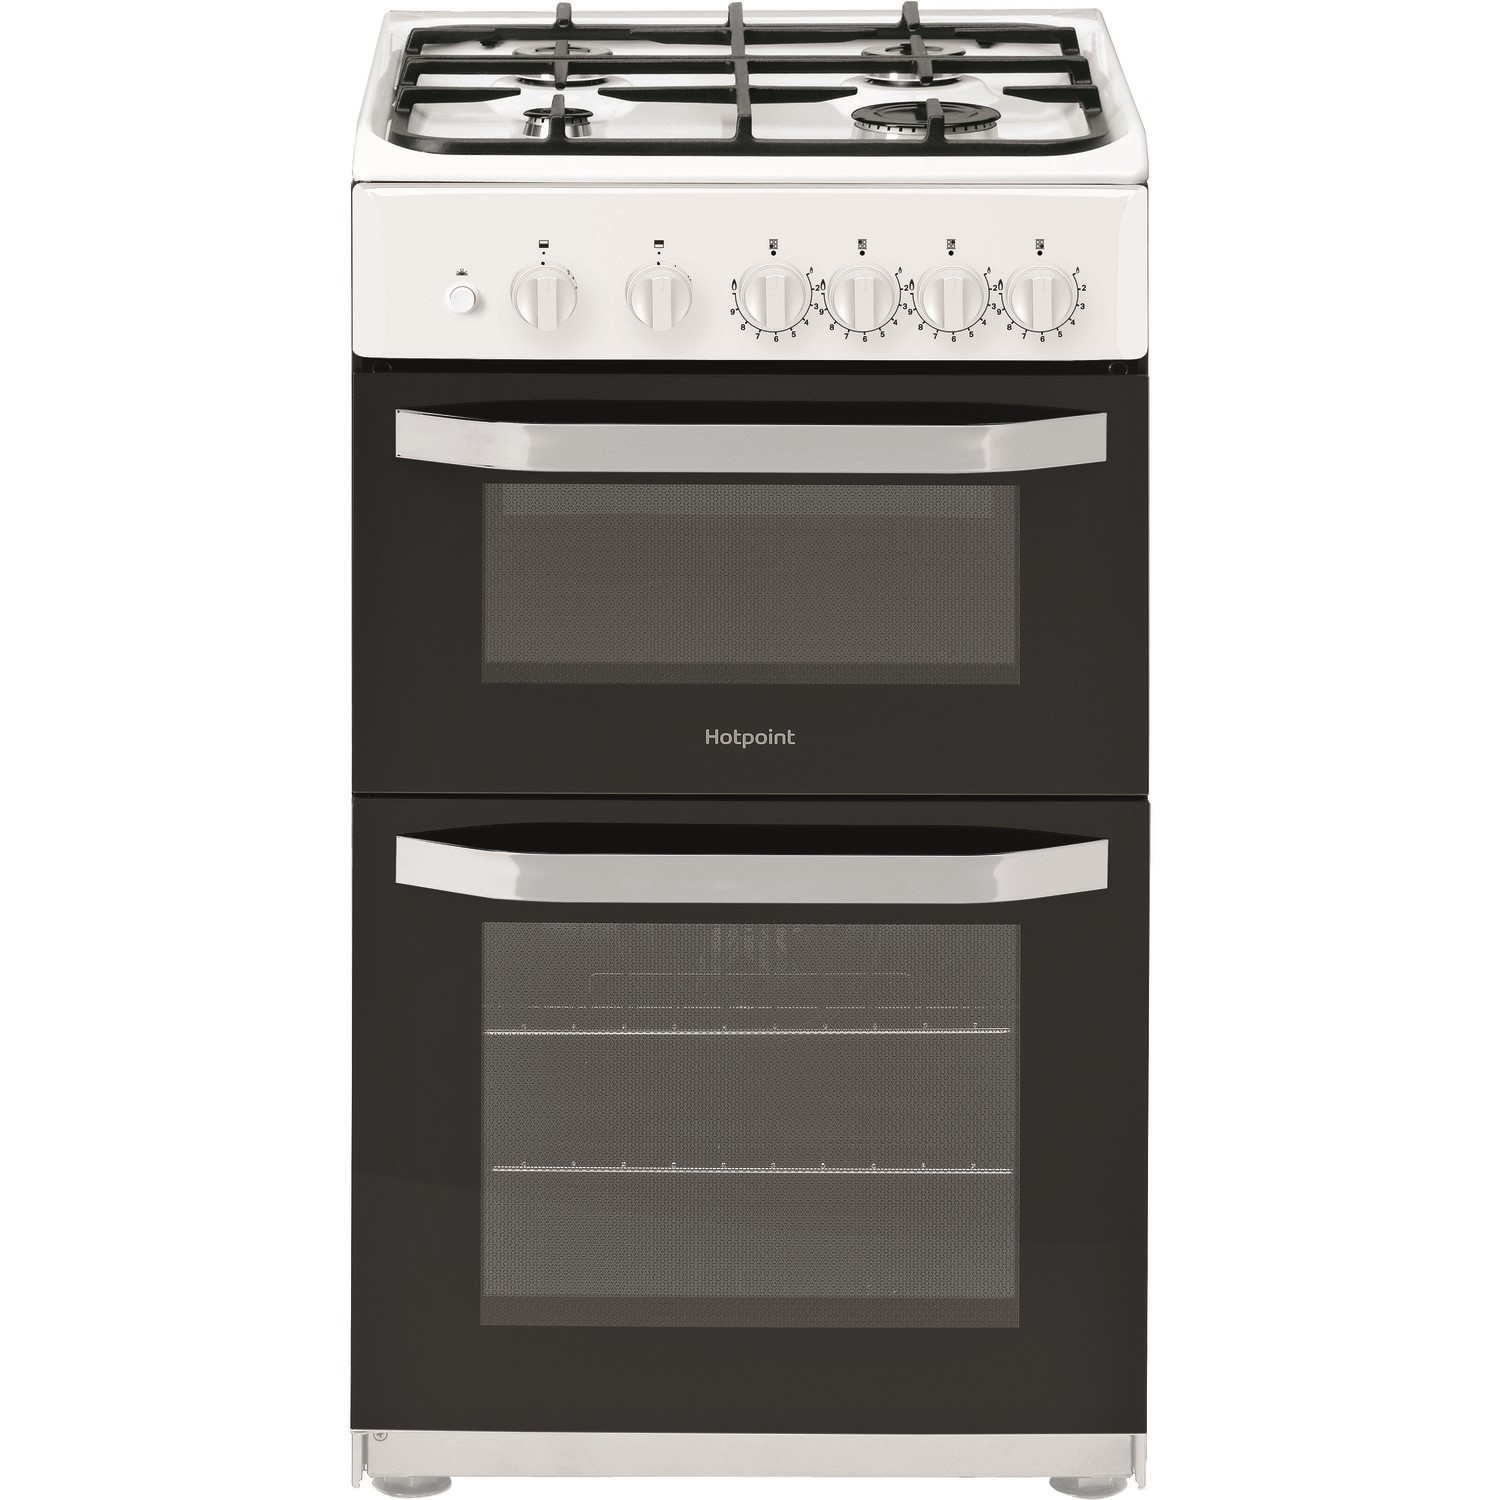 Hotpoint 50cm Double Cavity Gas Cooker - White